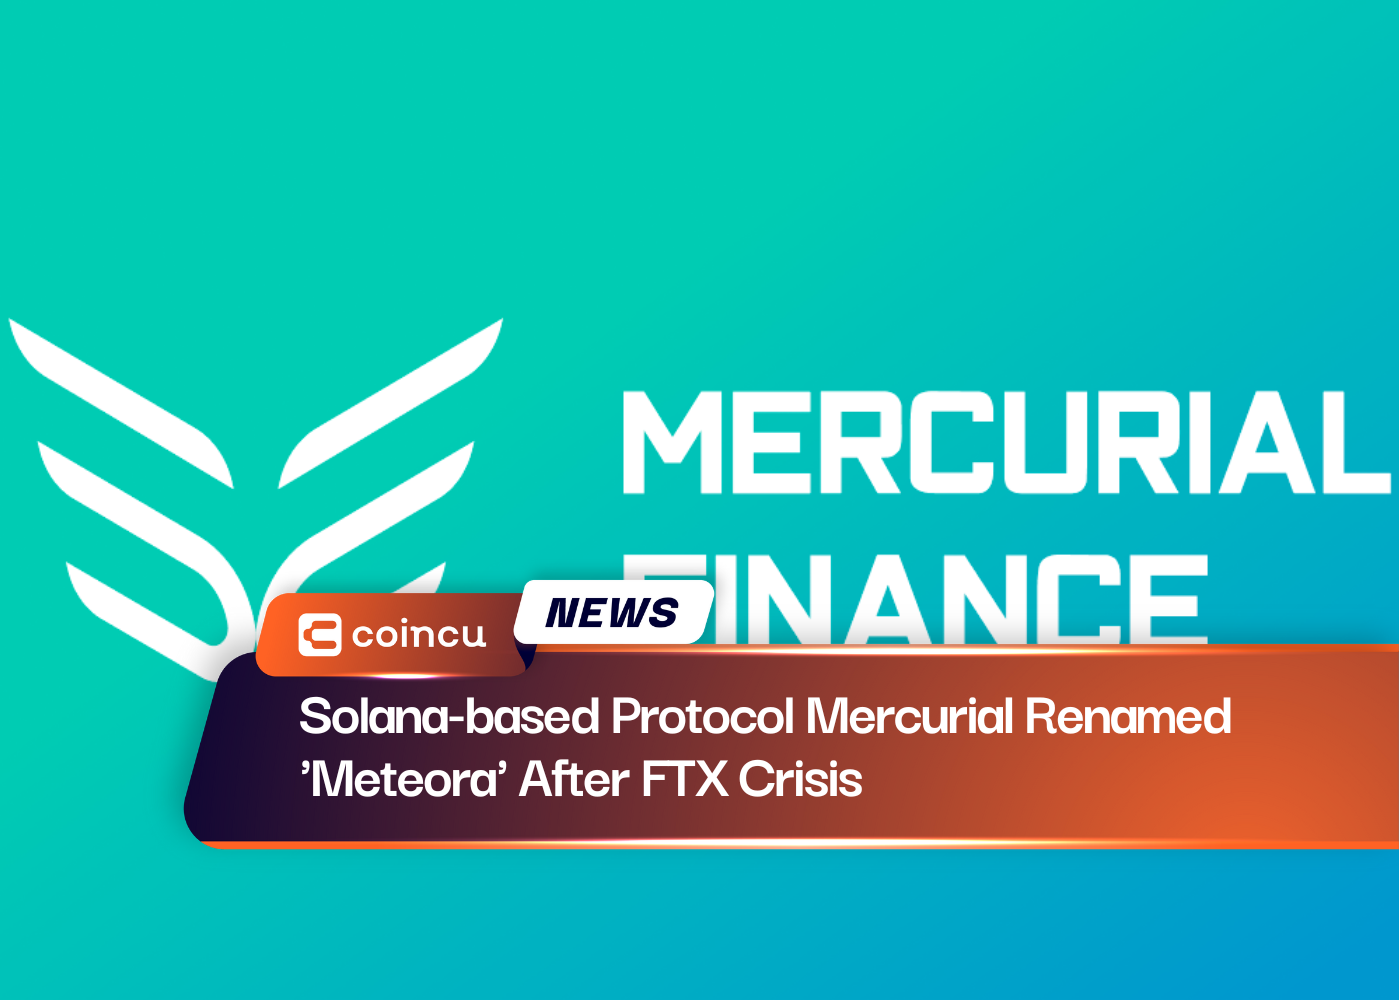 Solana-based Protocol Mercurial Renamed 'Meteora' After FTX Crisis